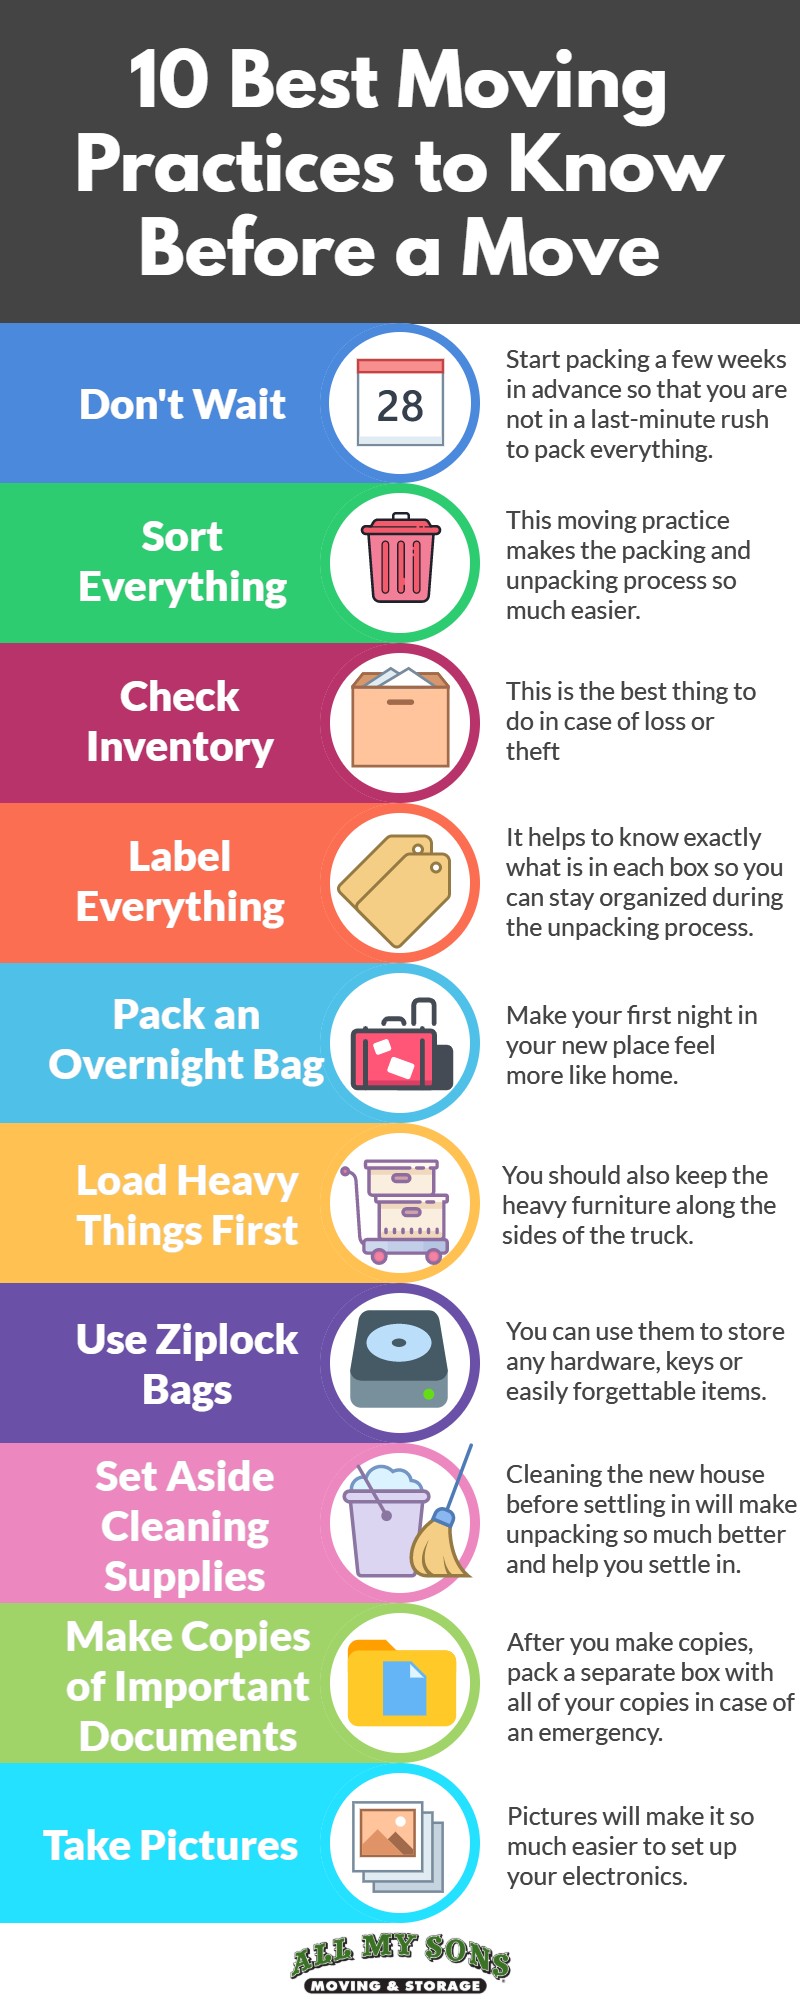 10 Best Moving Practices to Know Before Moving infographic